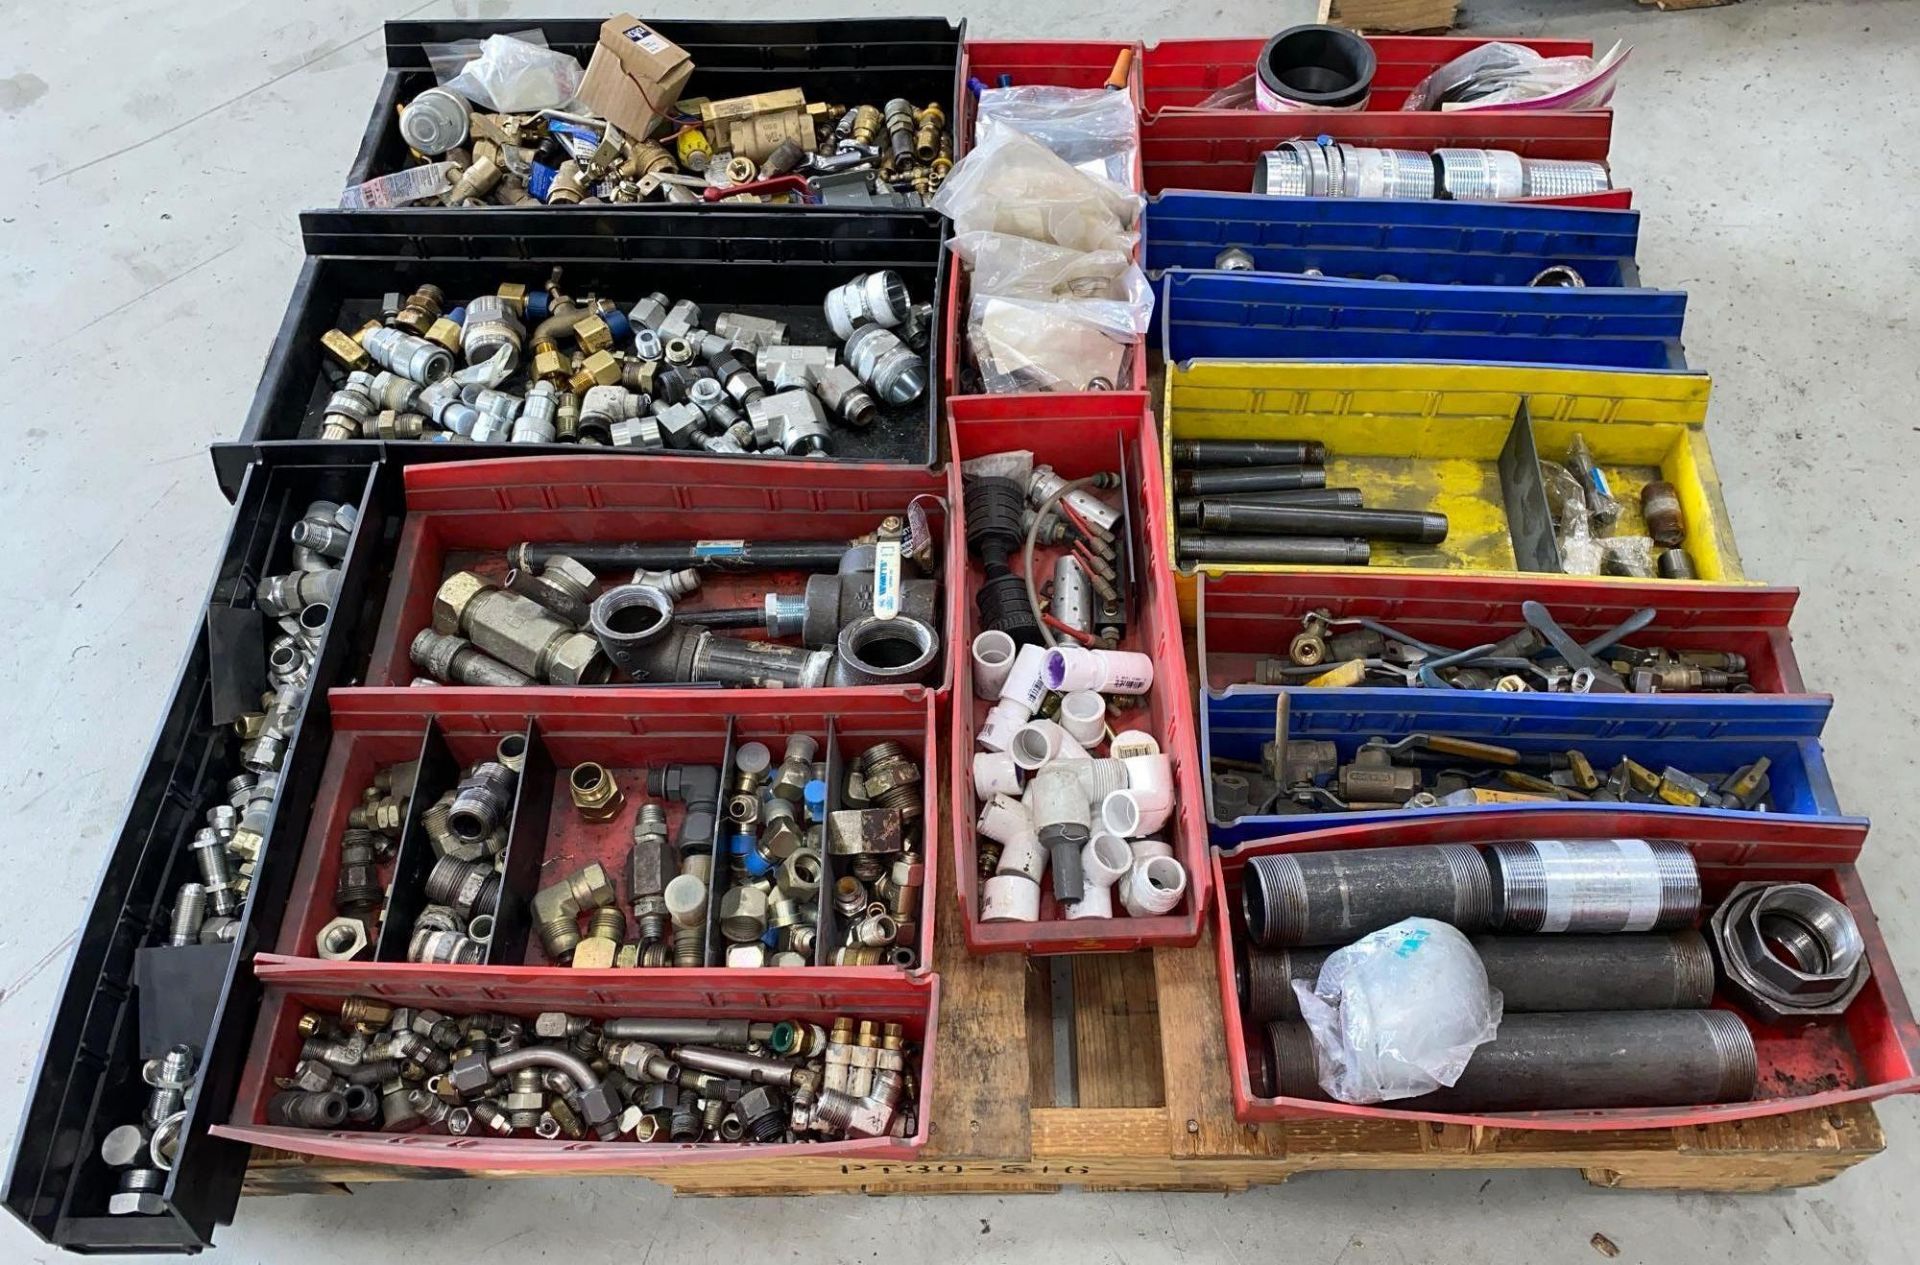 Skid / Lot of Misc. Pipe Fittings, Valves, Nipples, Misc. Fittings - Image 2 of 6